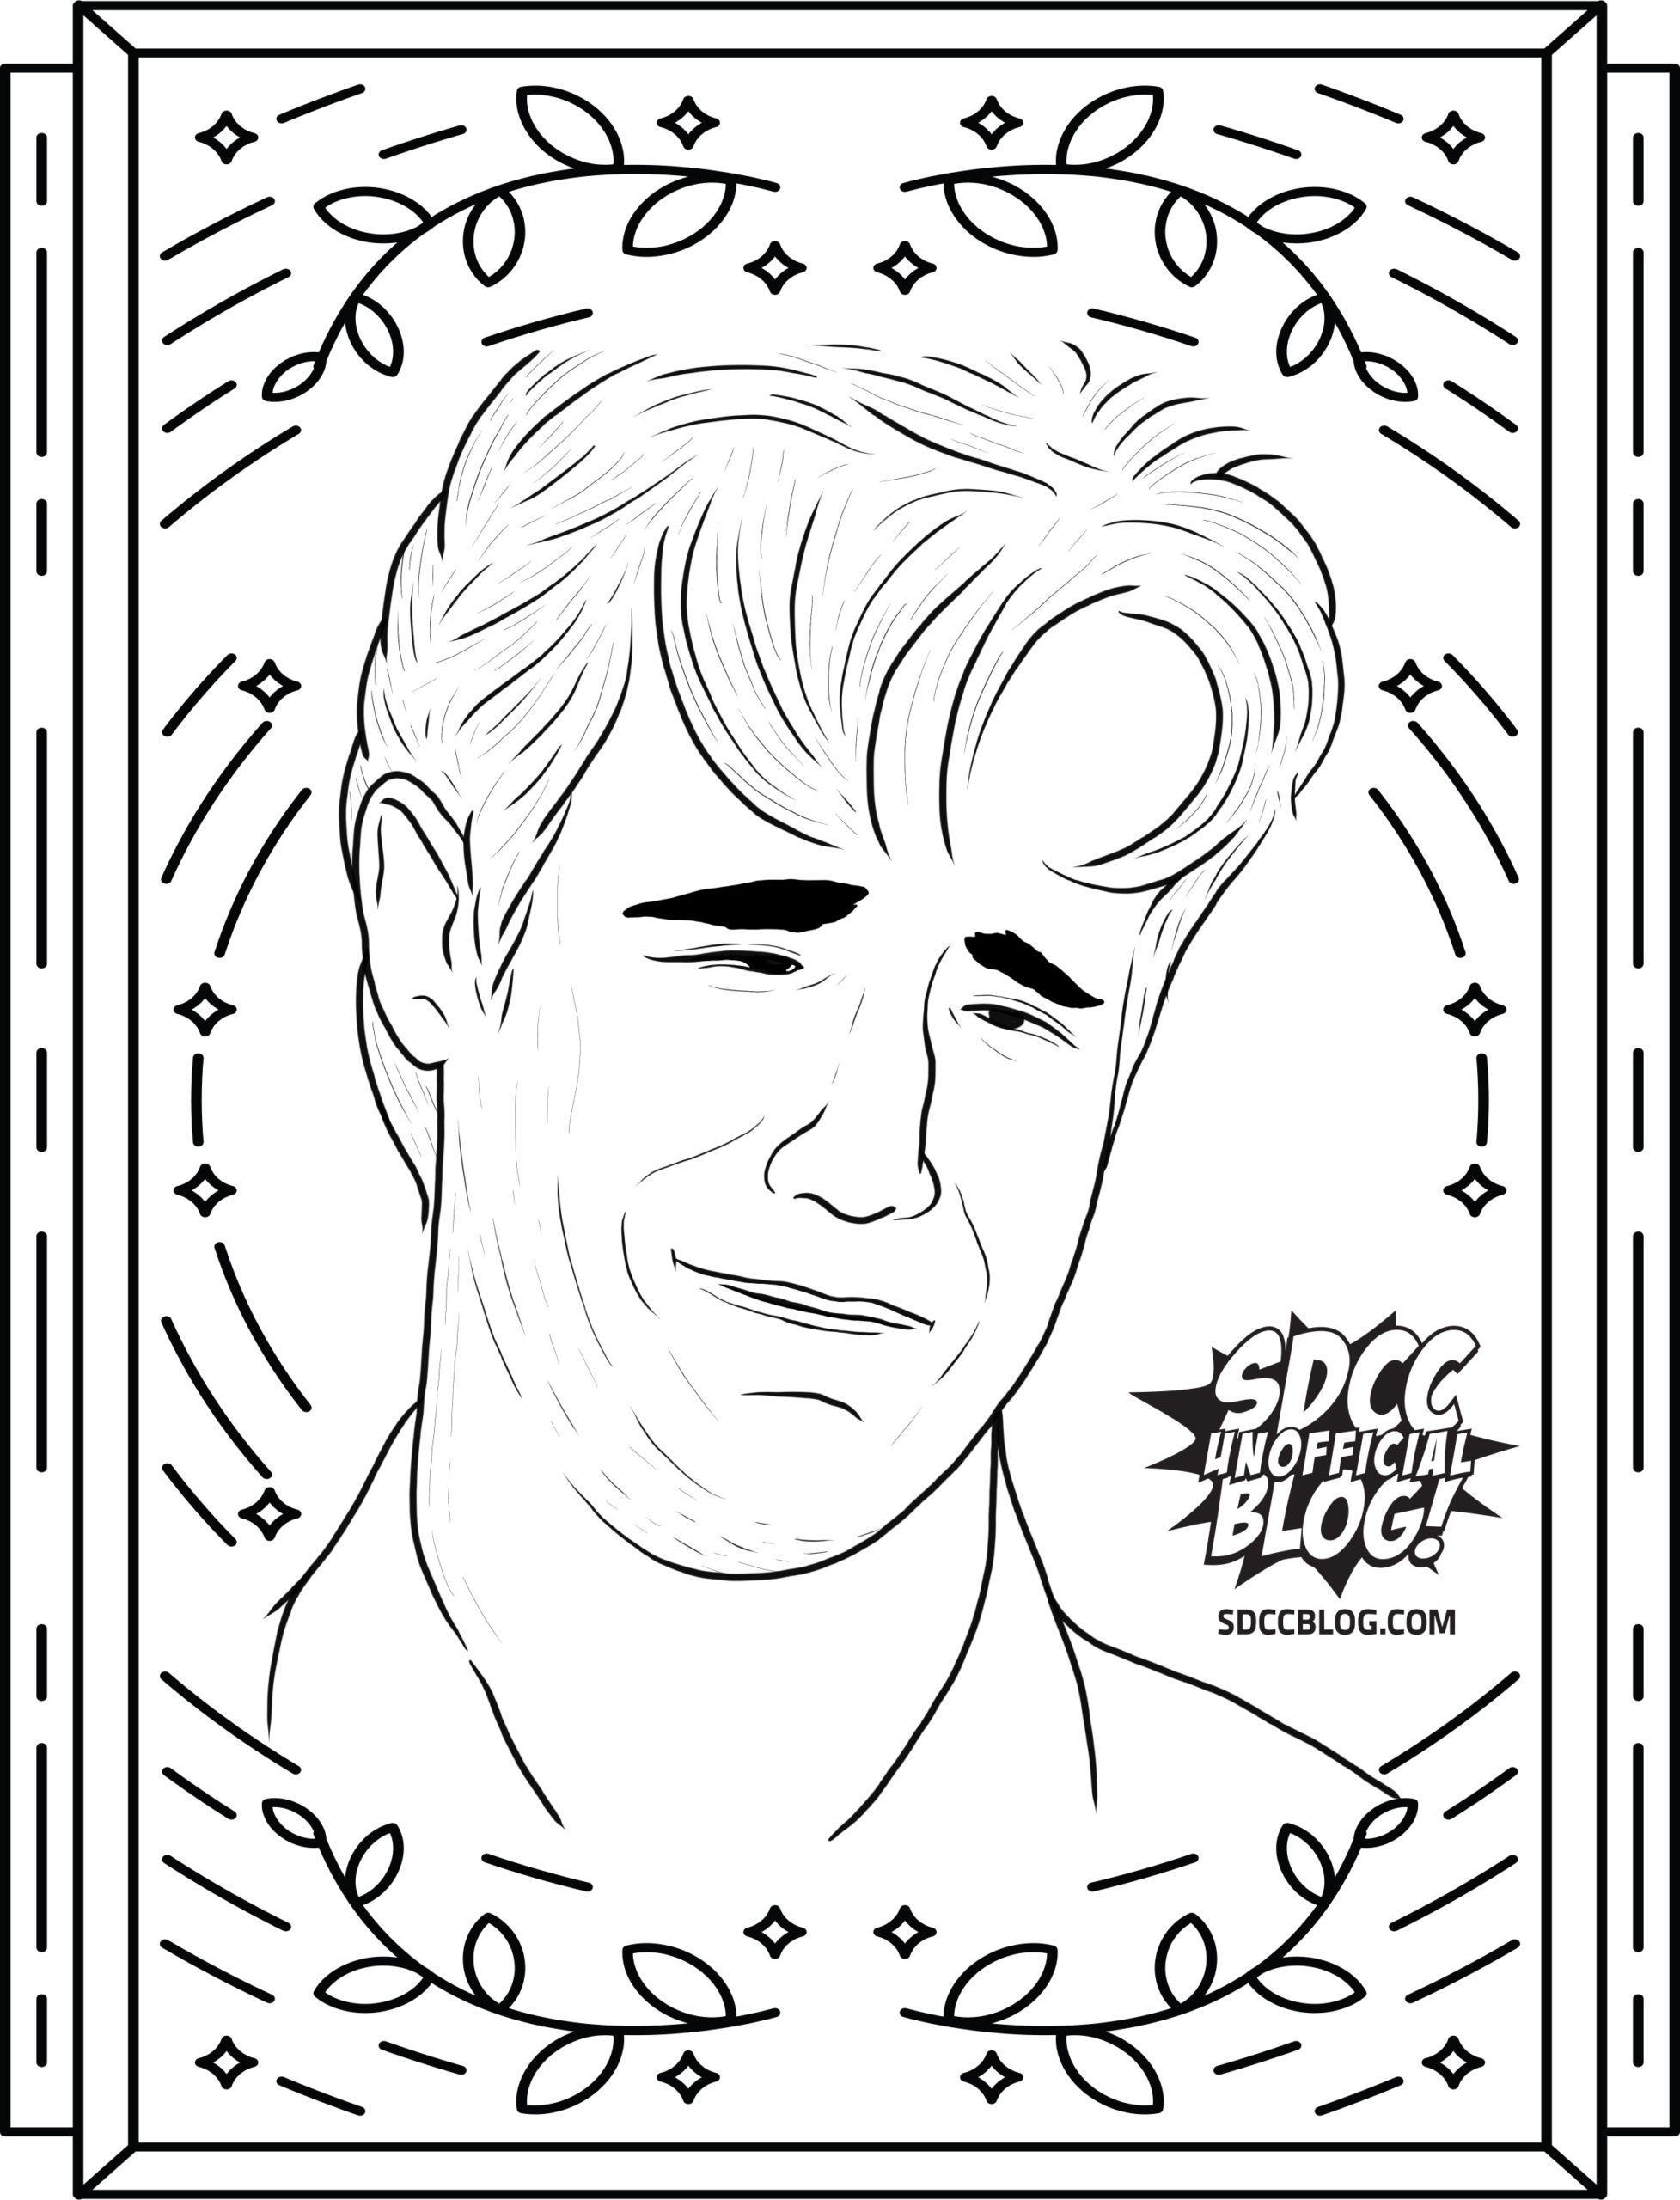 Pacey-Con Coloring Pages - San Diego Comic-Con Unofficial Blog